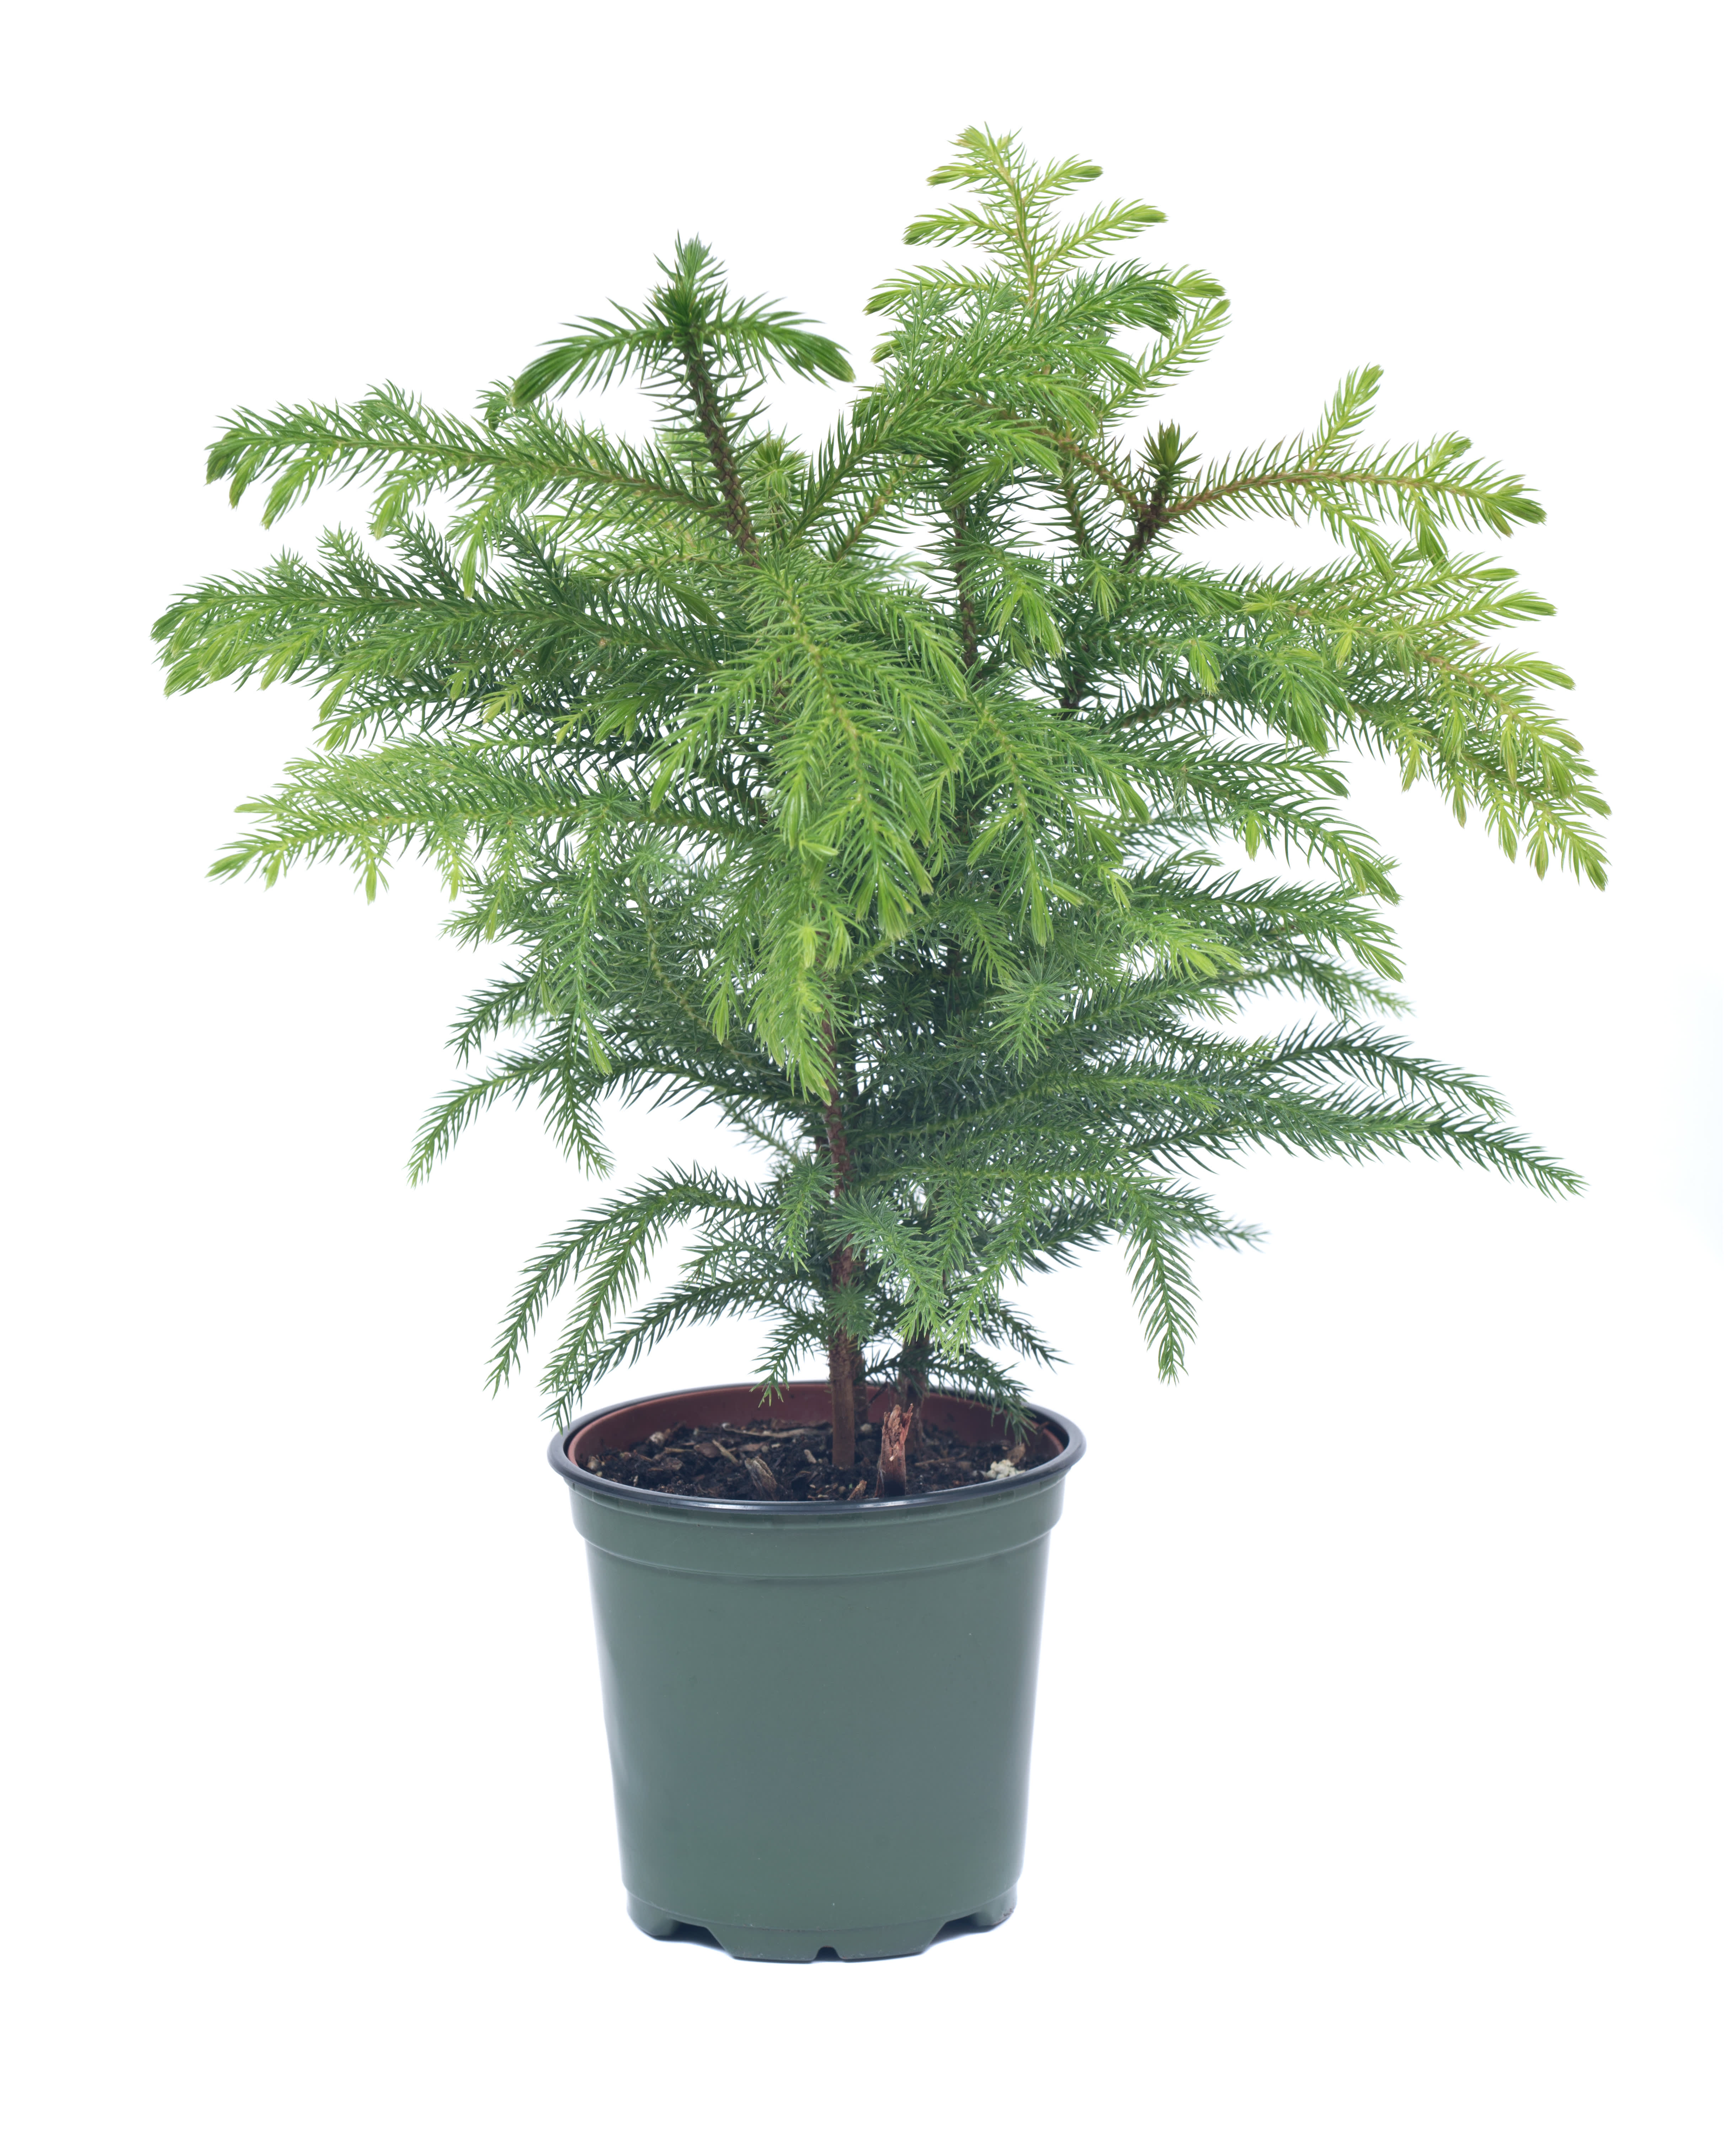 How To Grow Norfolk Island Pine Plants Indoors Apartment Therapy